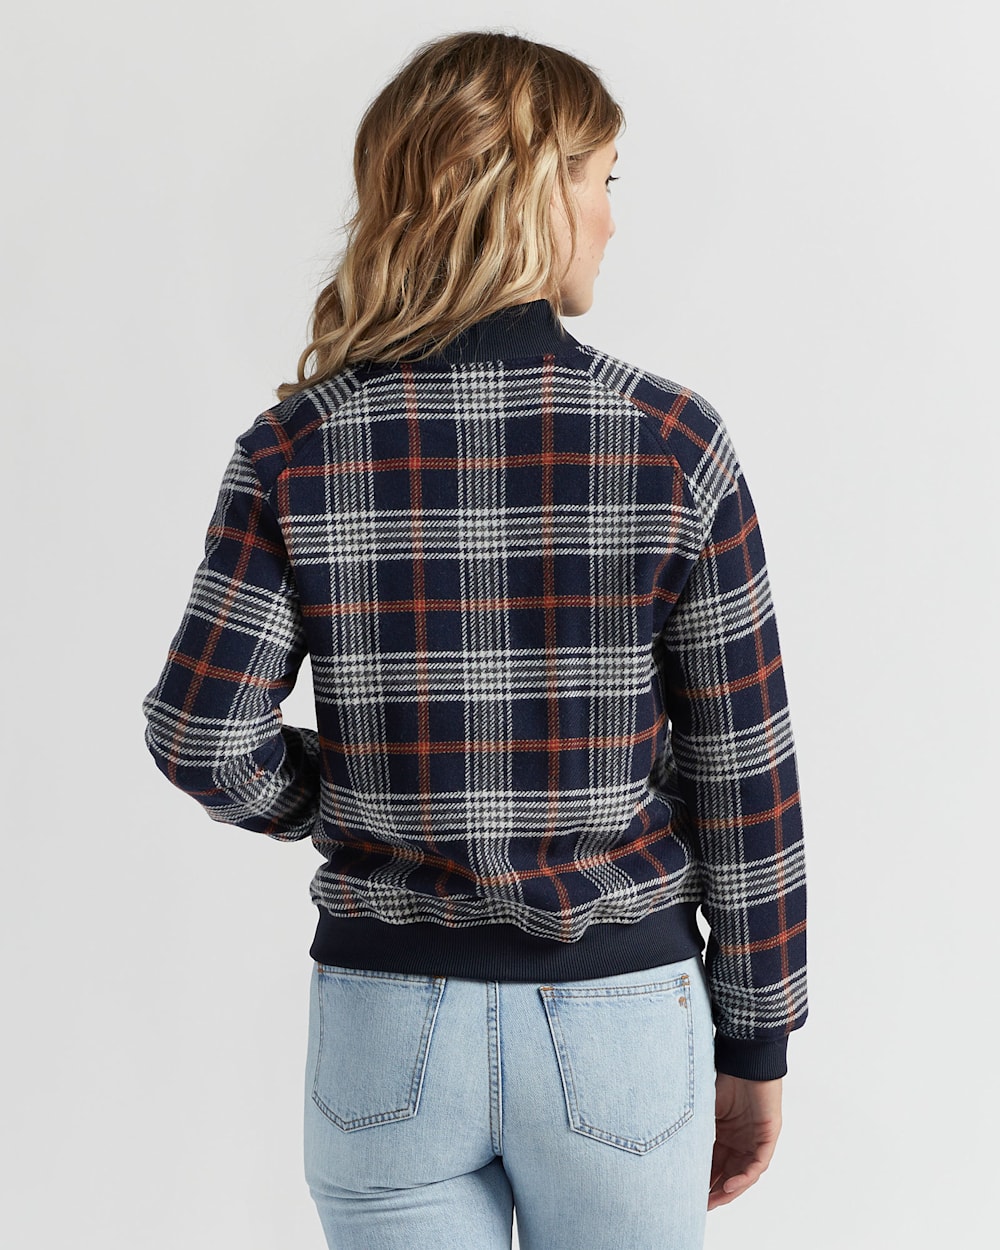 WOMEN'S WOOL PLAID BOMBER JACKET IN NAVY/RED PLAID image number 3